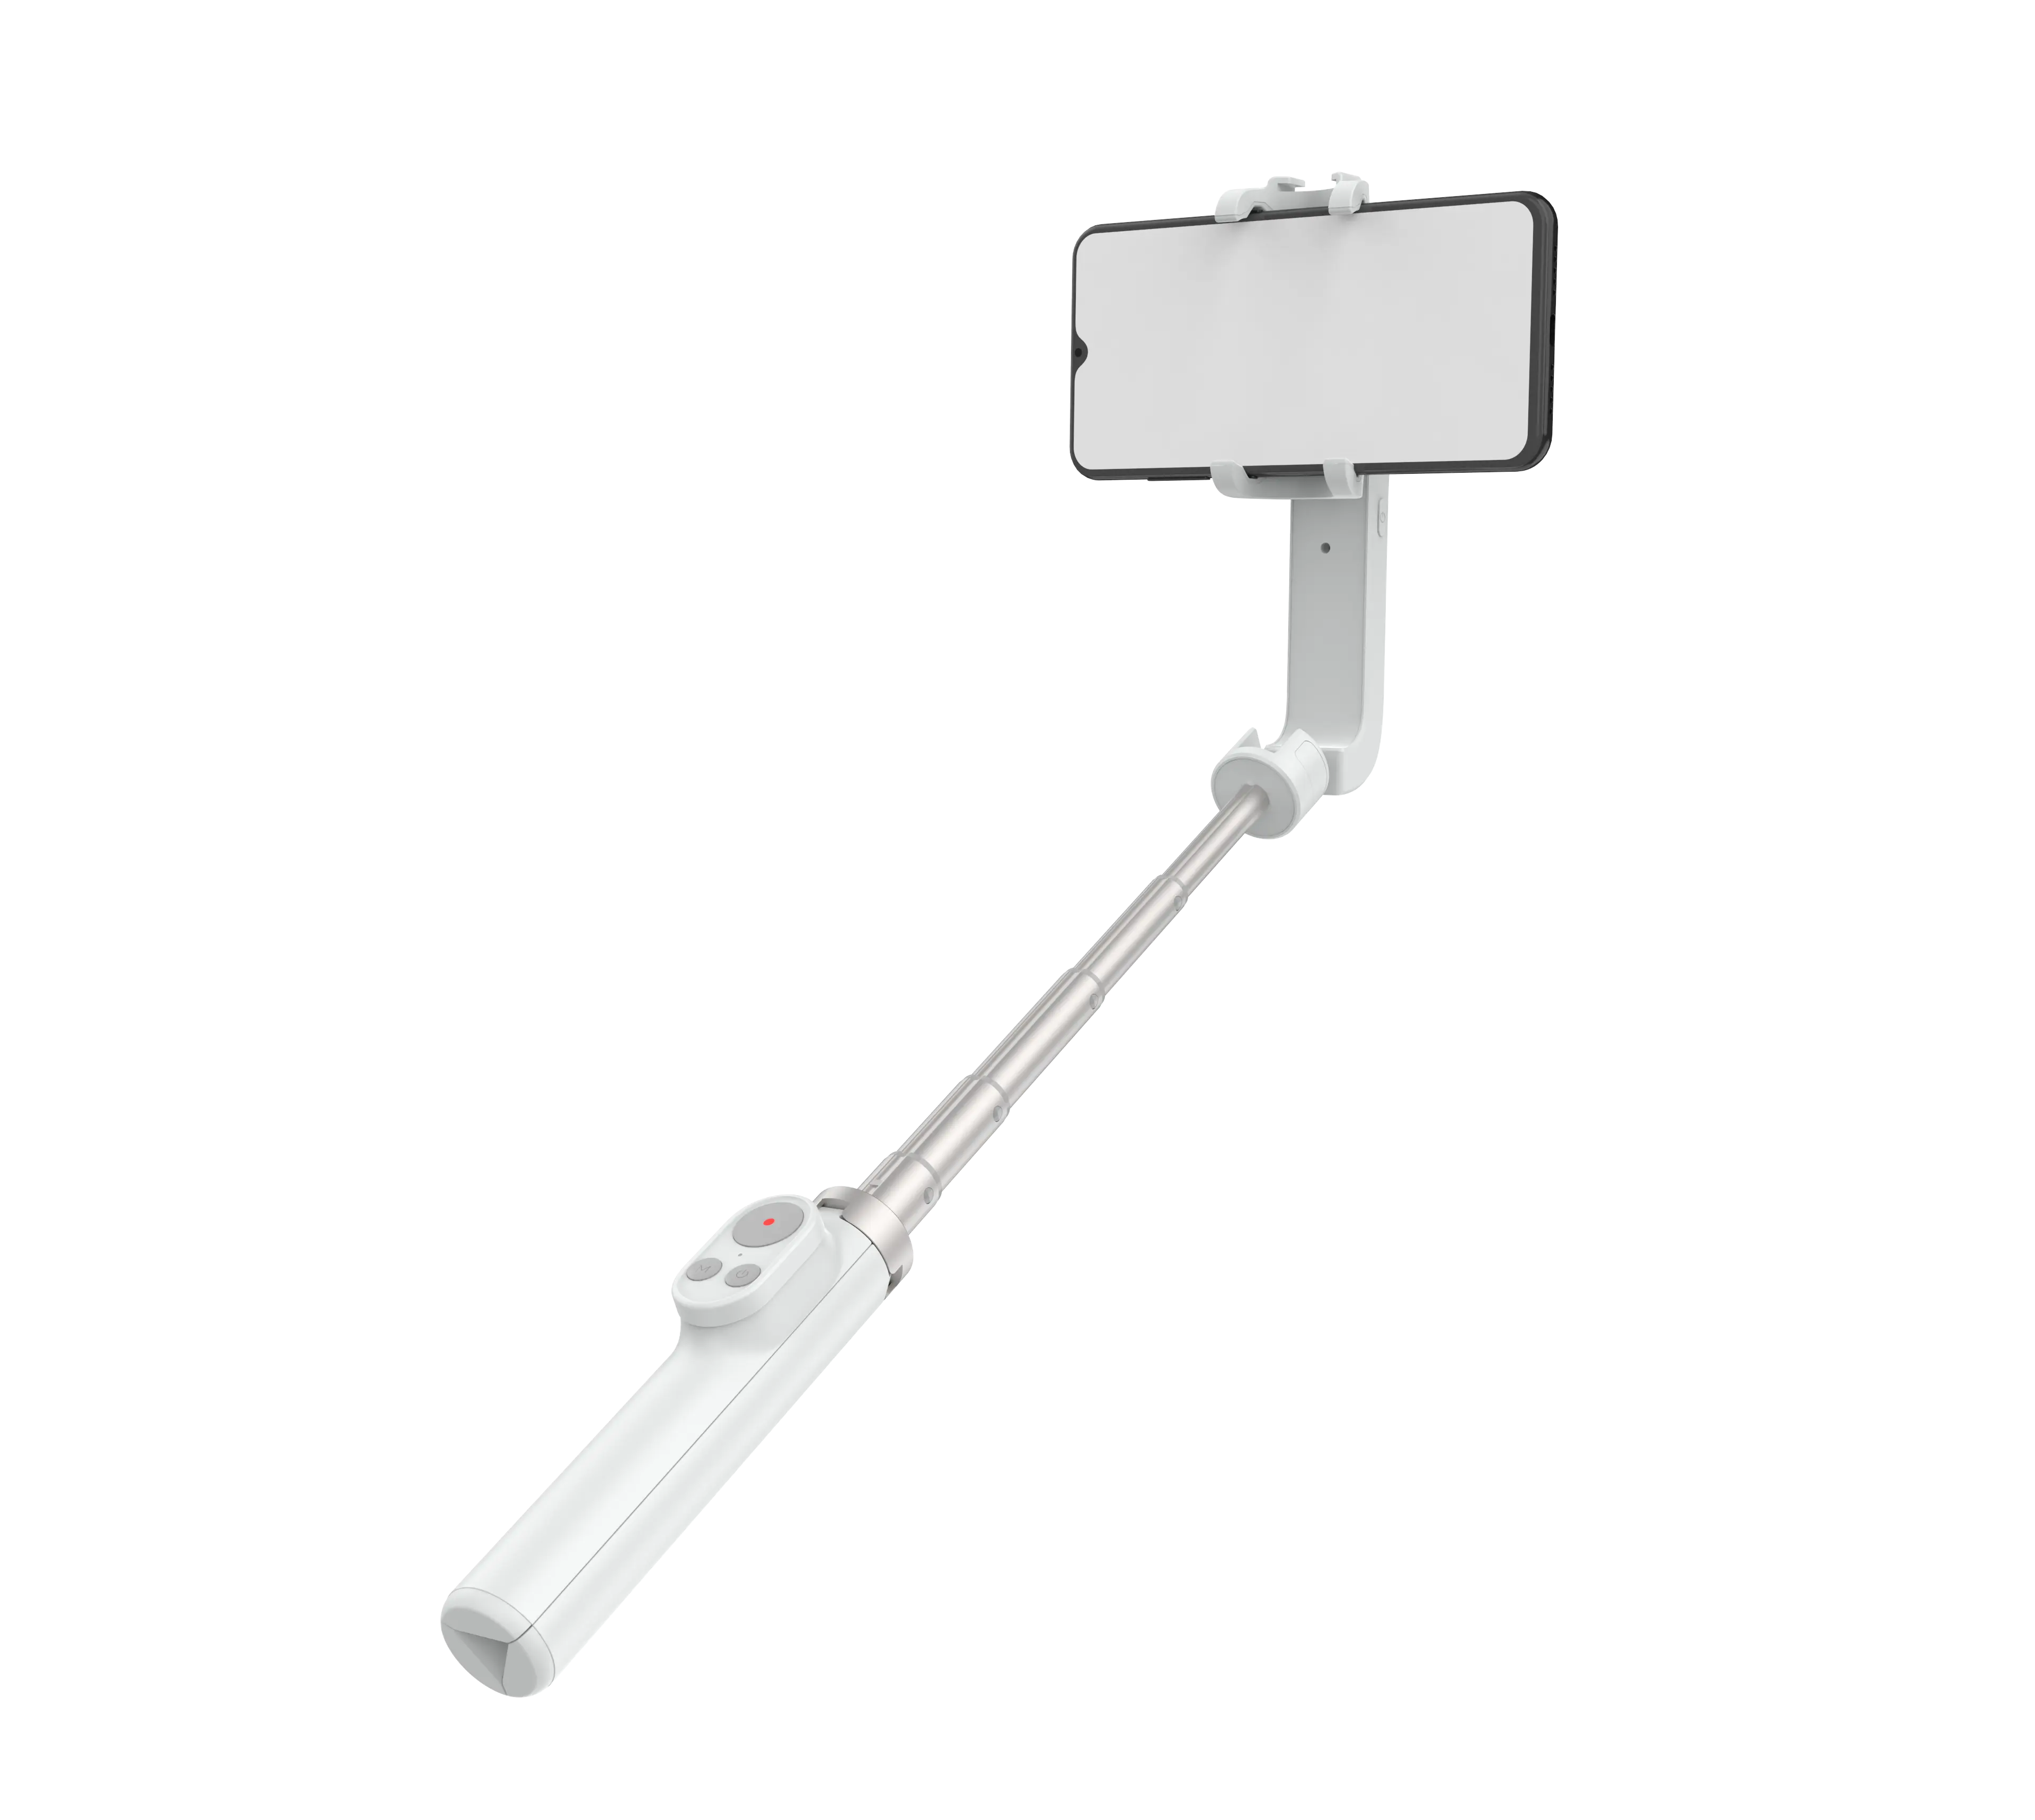 Compact Integrated Intelligent Retractable Single-axis Stabilizer For Mobile Phone Selfie Stick Live Anti-shaking Tripod Bracket